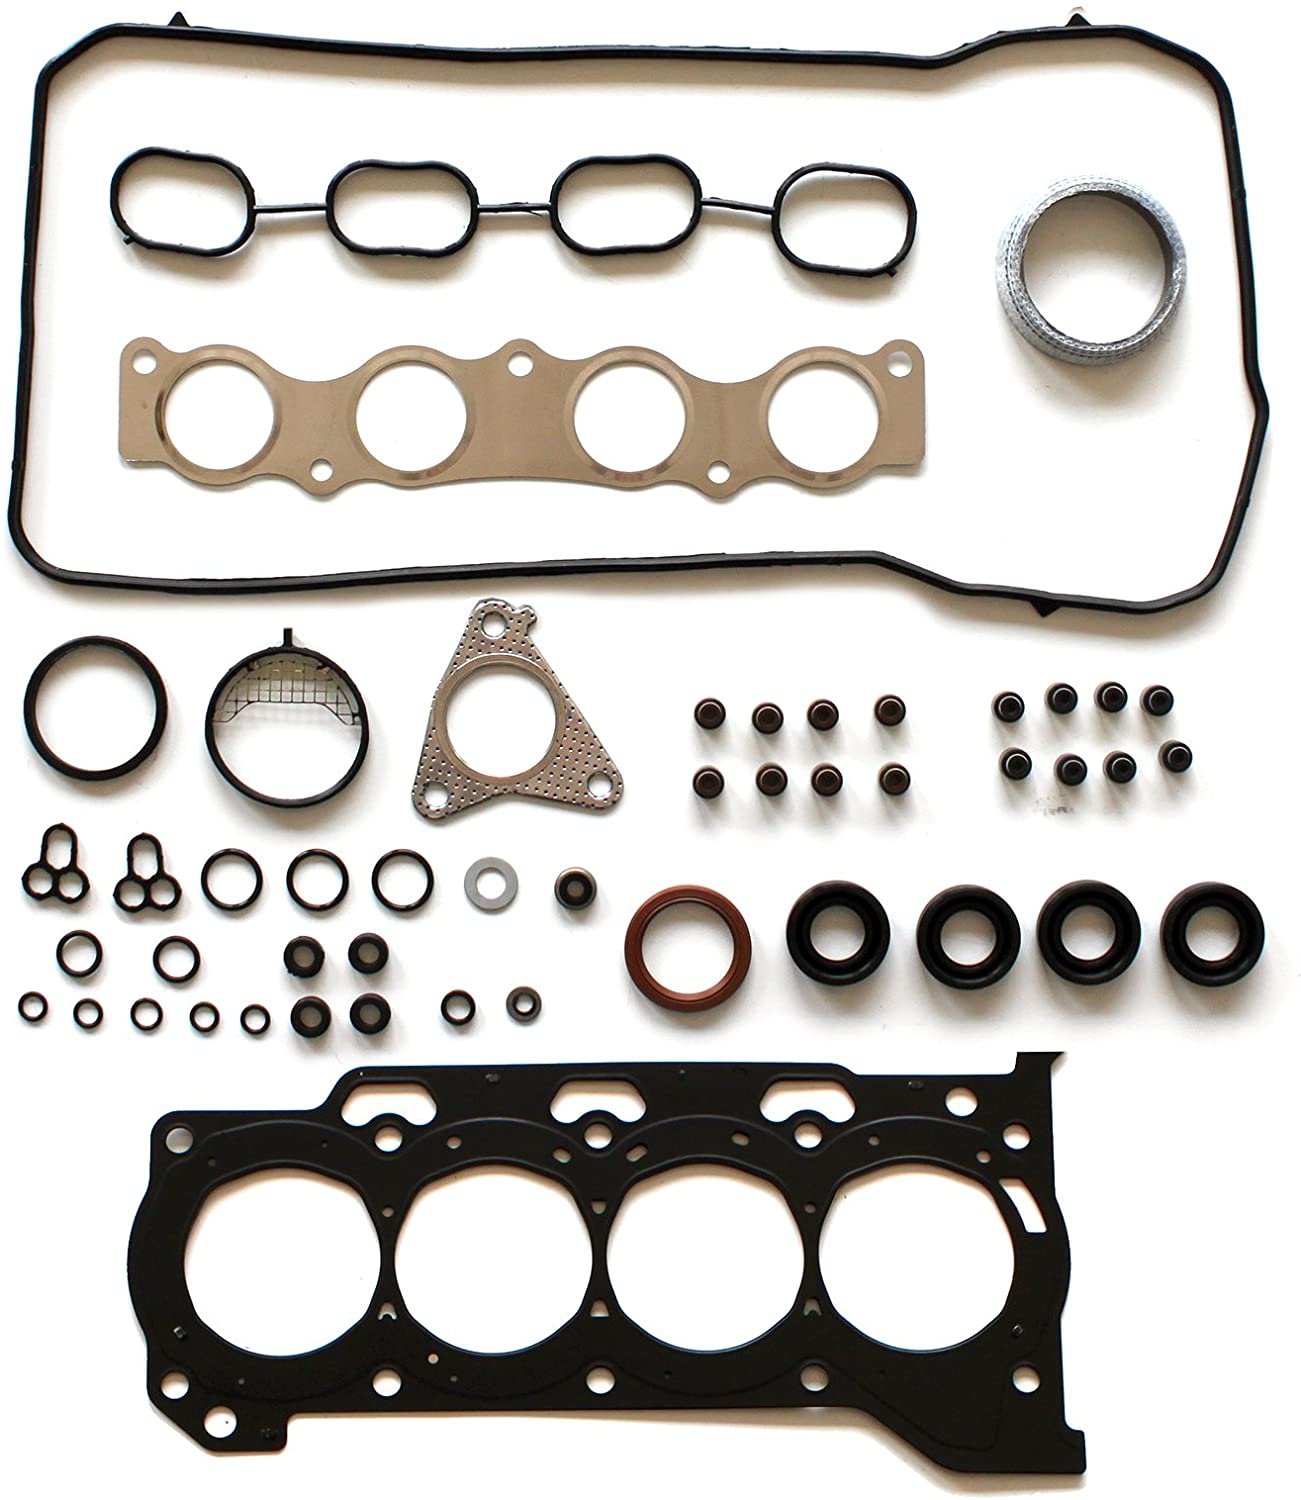 ECCPP Engine Replacement Head Gasket Set for 2008-2015 for Toyota Corolla Matrix for Scion xD for Pontiac Vibe 1.8L 2.4L 2ZRFE Engine Head Gaskets Kit